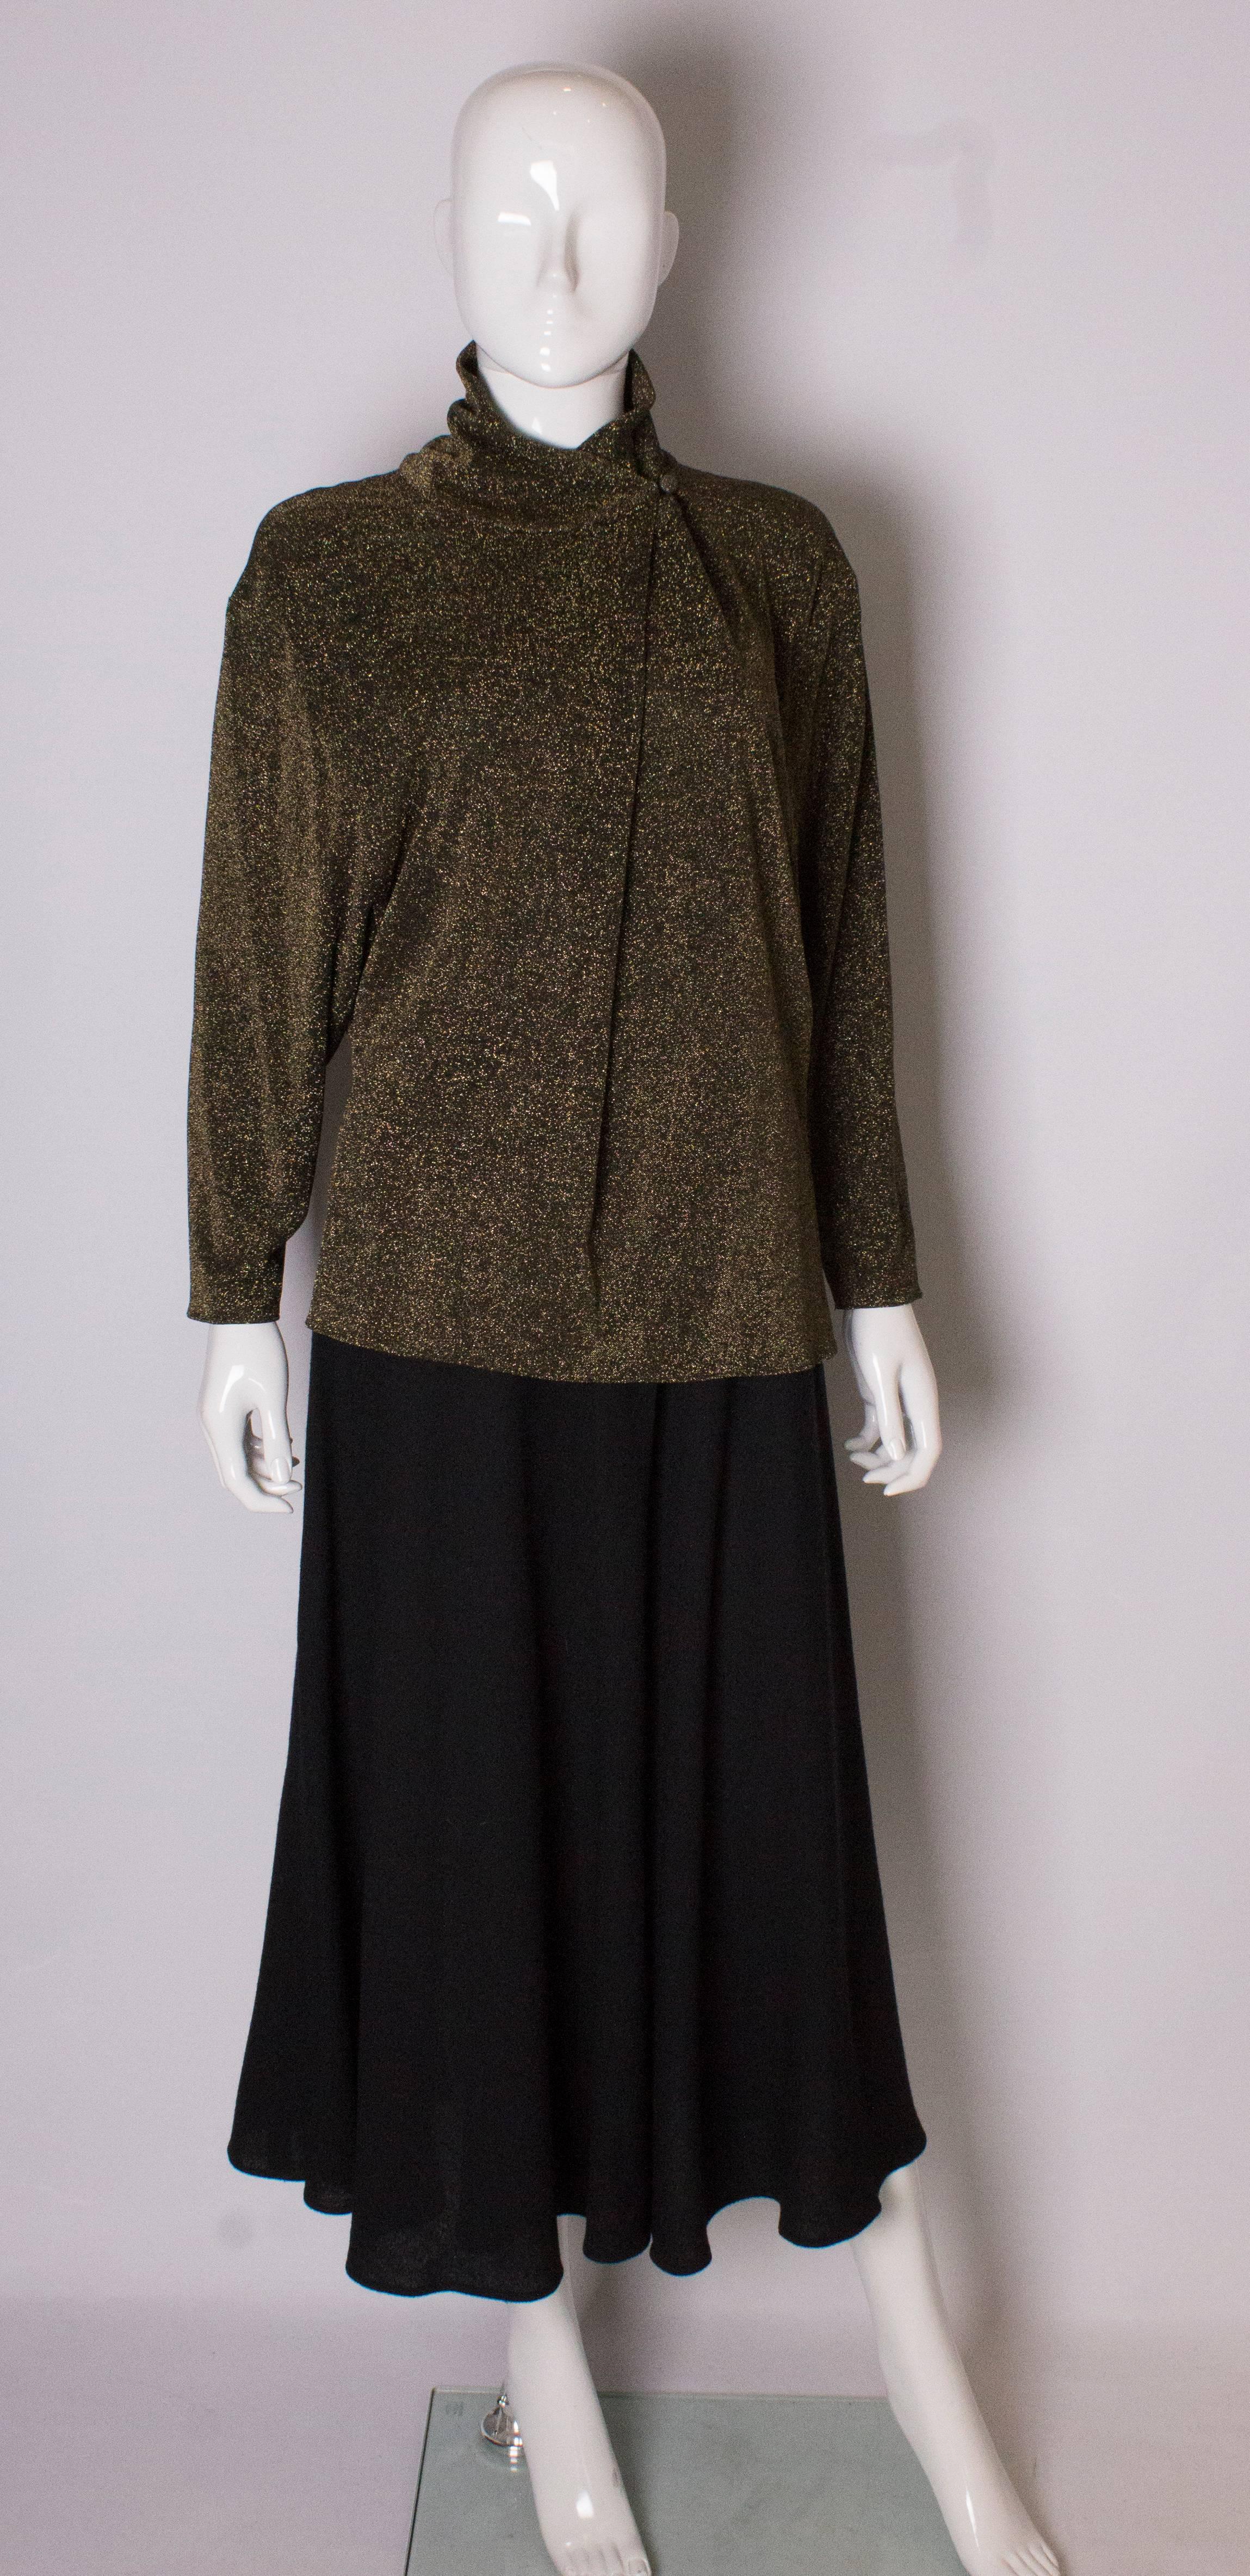 An easy to wear vintage gold lurex top by Janice Wainwright. The top has tapered sleeves and a drape over front.